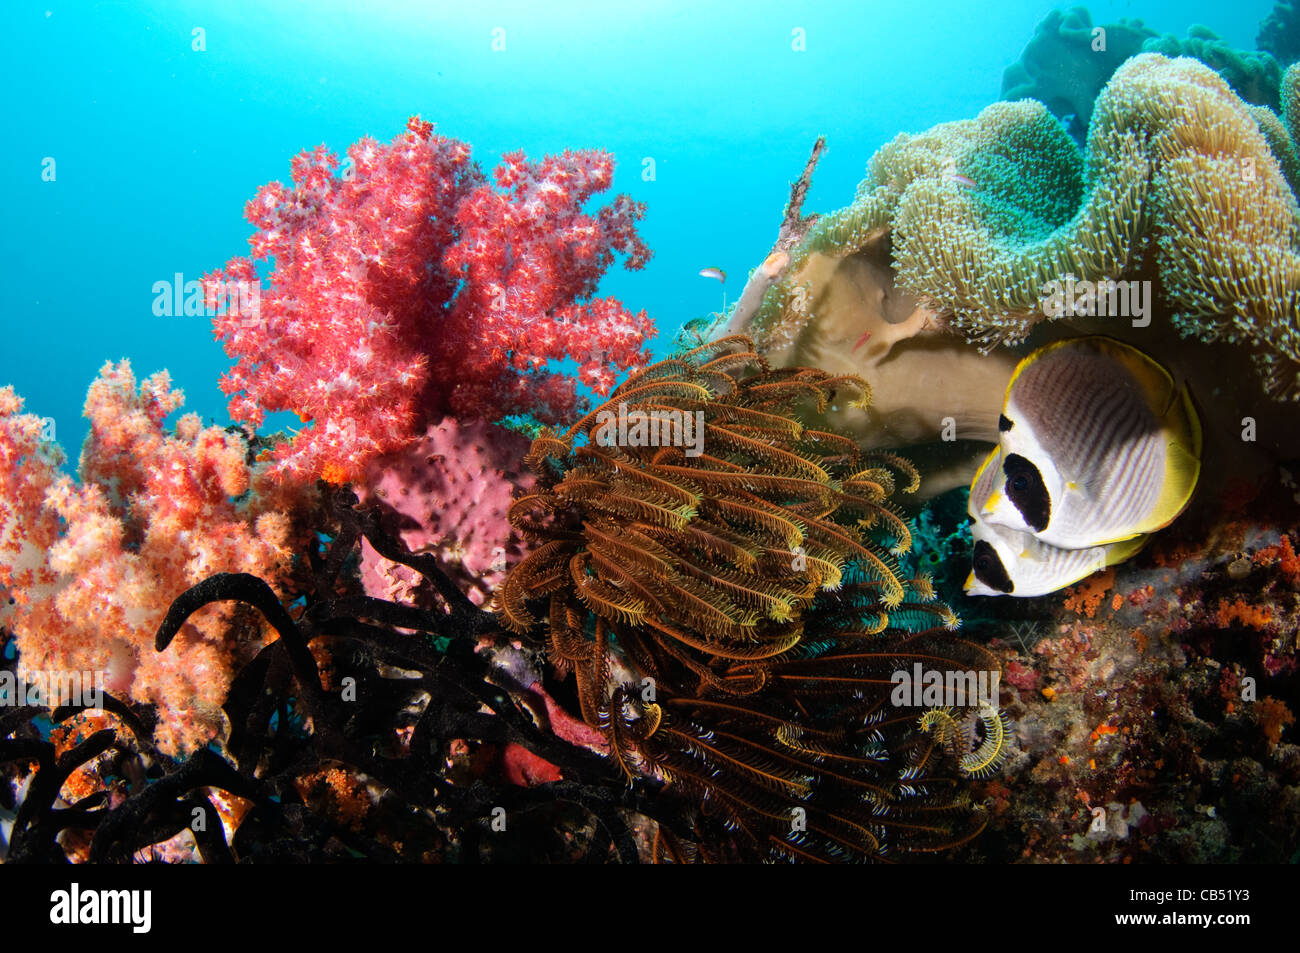 Soft coral and panda Butterfly fish, Dendronephthya sp. and Chaetodon adiergastos, Misool, Raja Ampat, West Papua, Indonesia, Pa Stock Photo